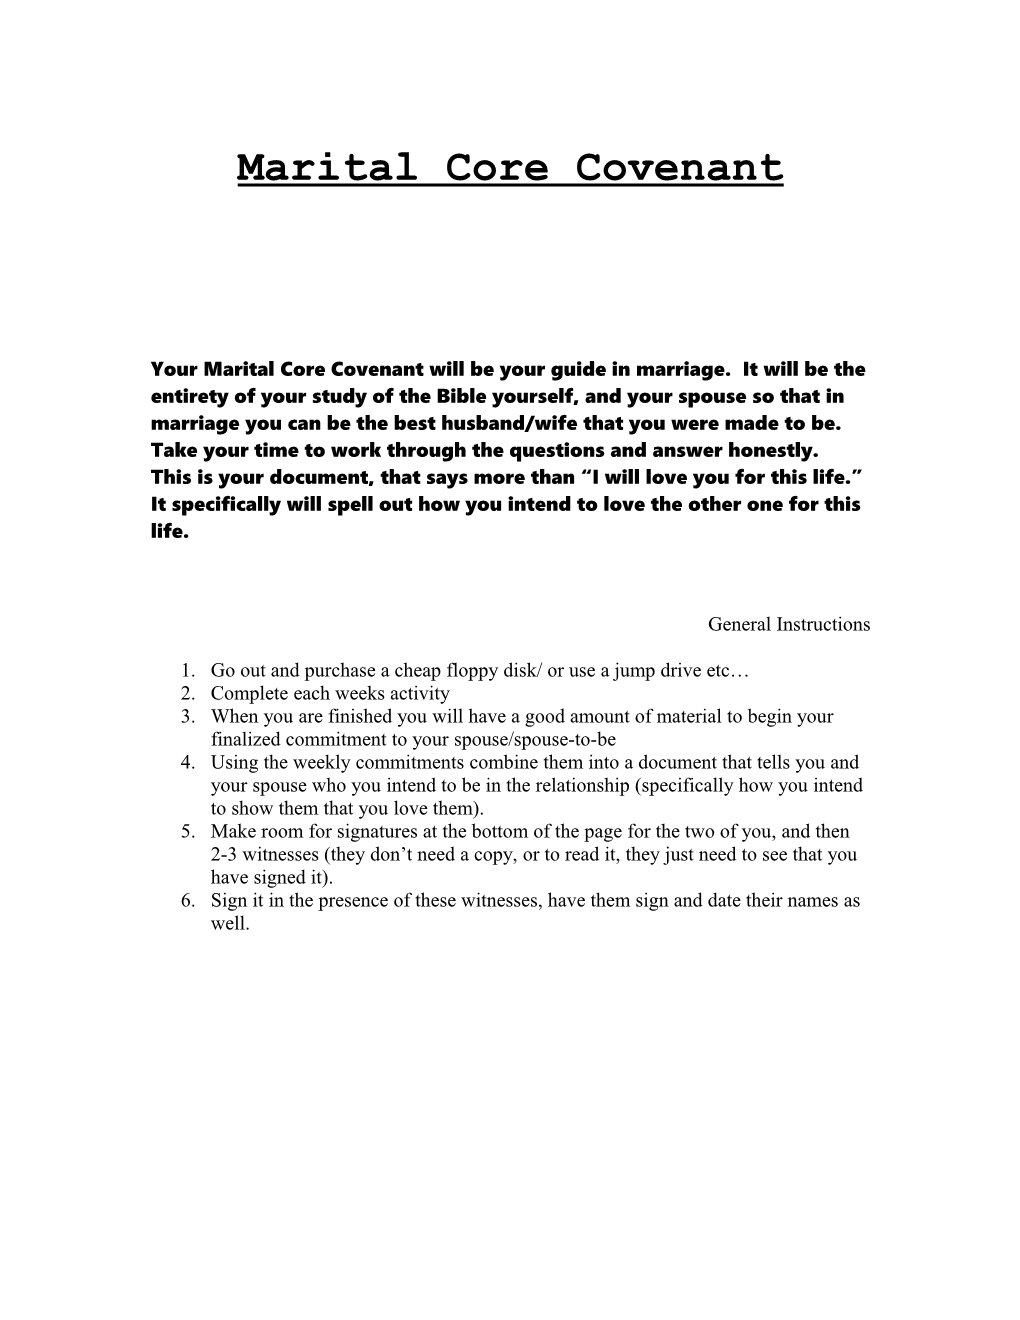 Questions for Developing Your Marital Core Covenant